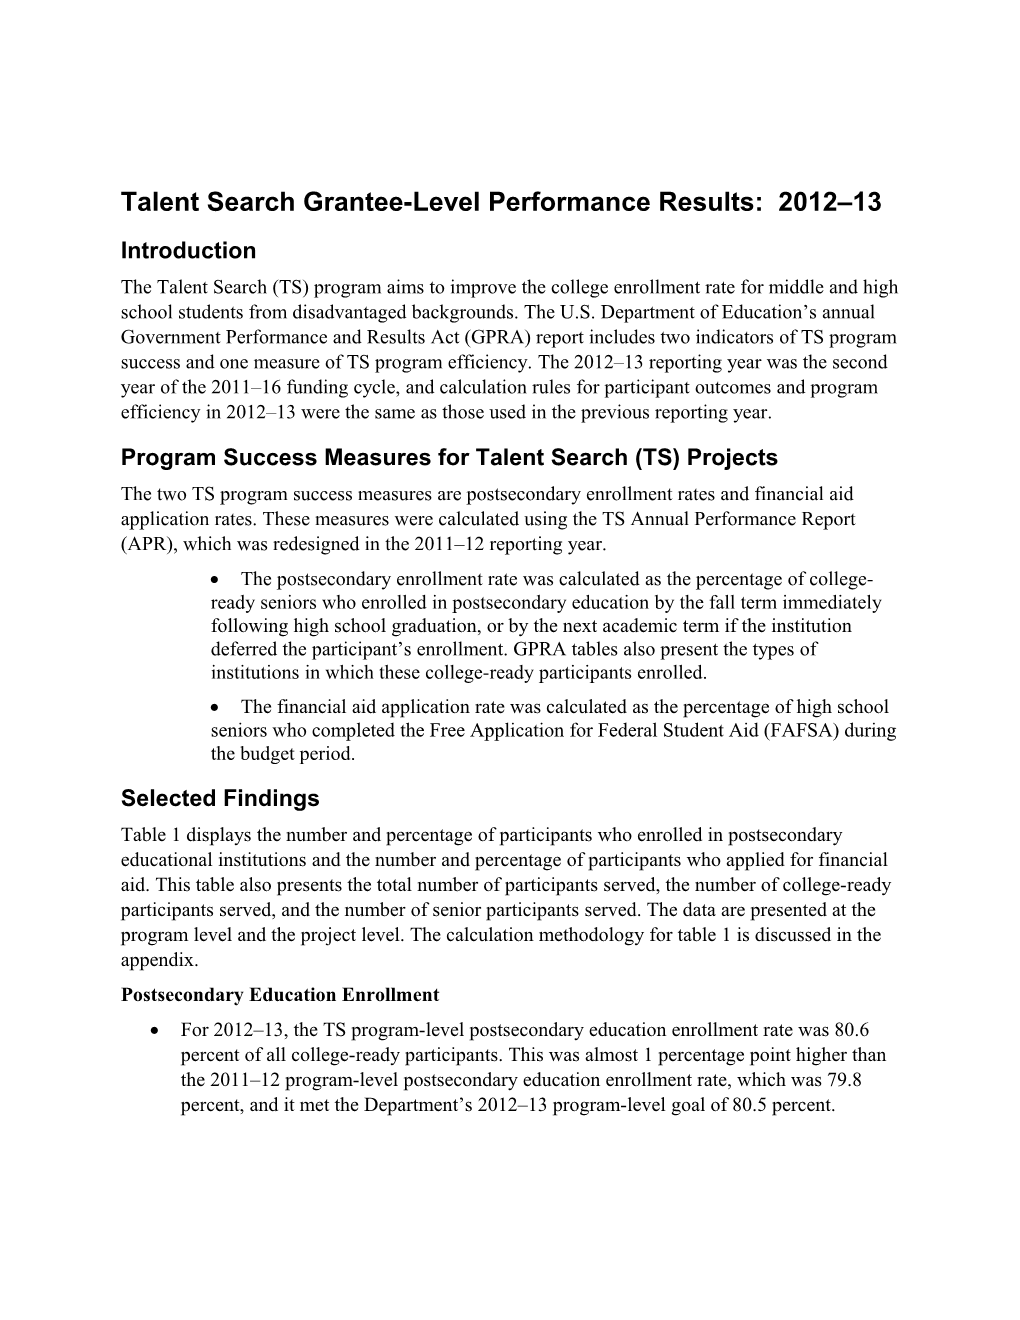 Talent Search Program - Discussion of Grantee-Level Performance Data Results for 2012-14